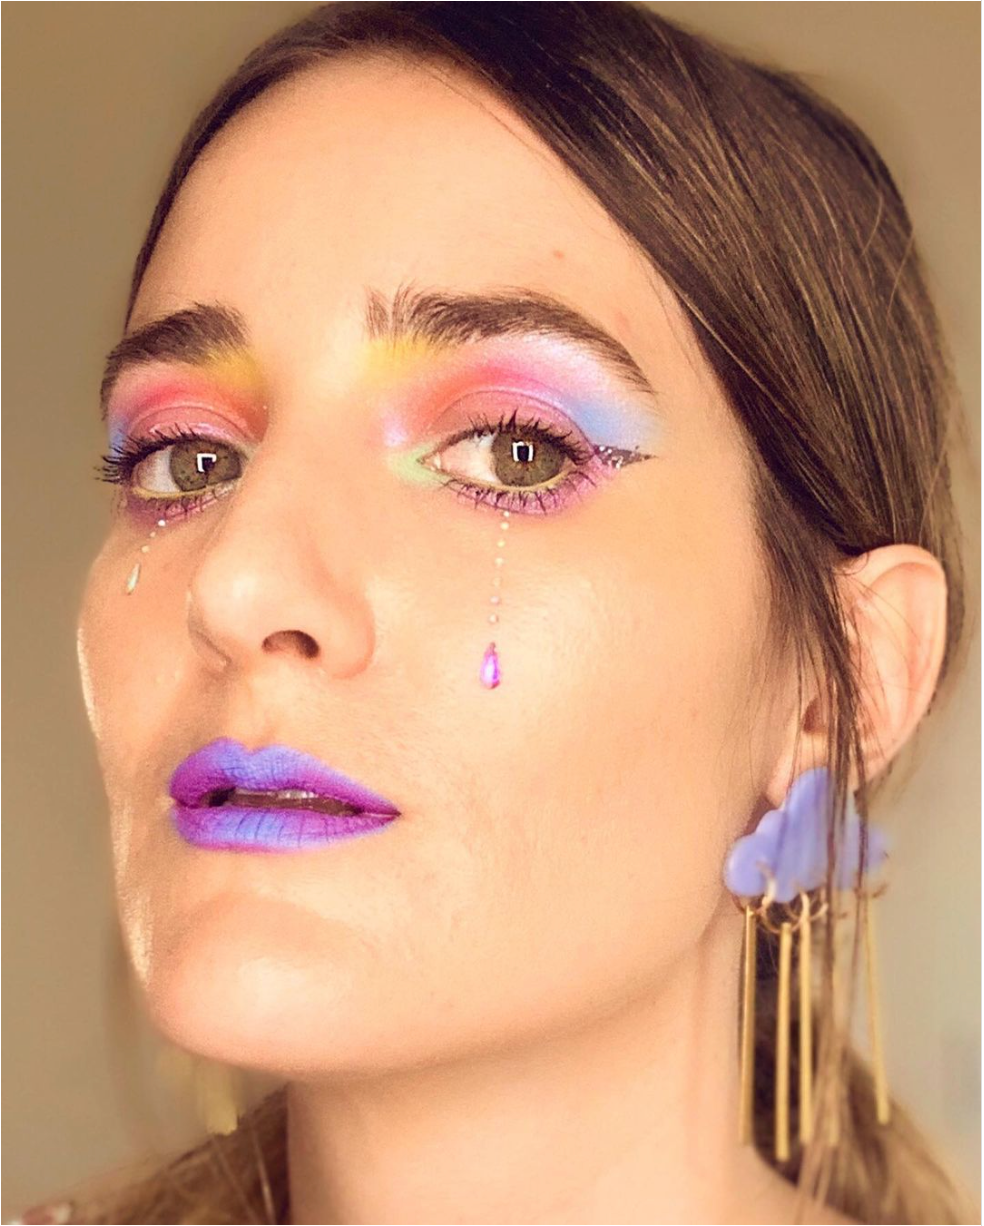 You *need* to follow Euphoria’s make-up artist on Instagram